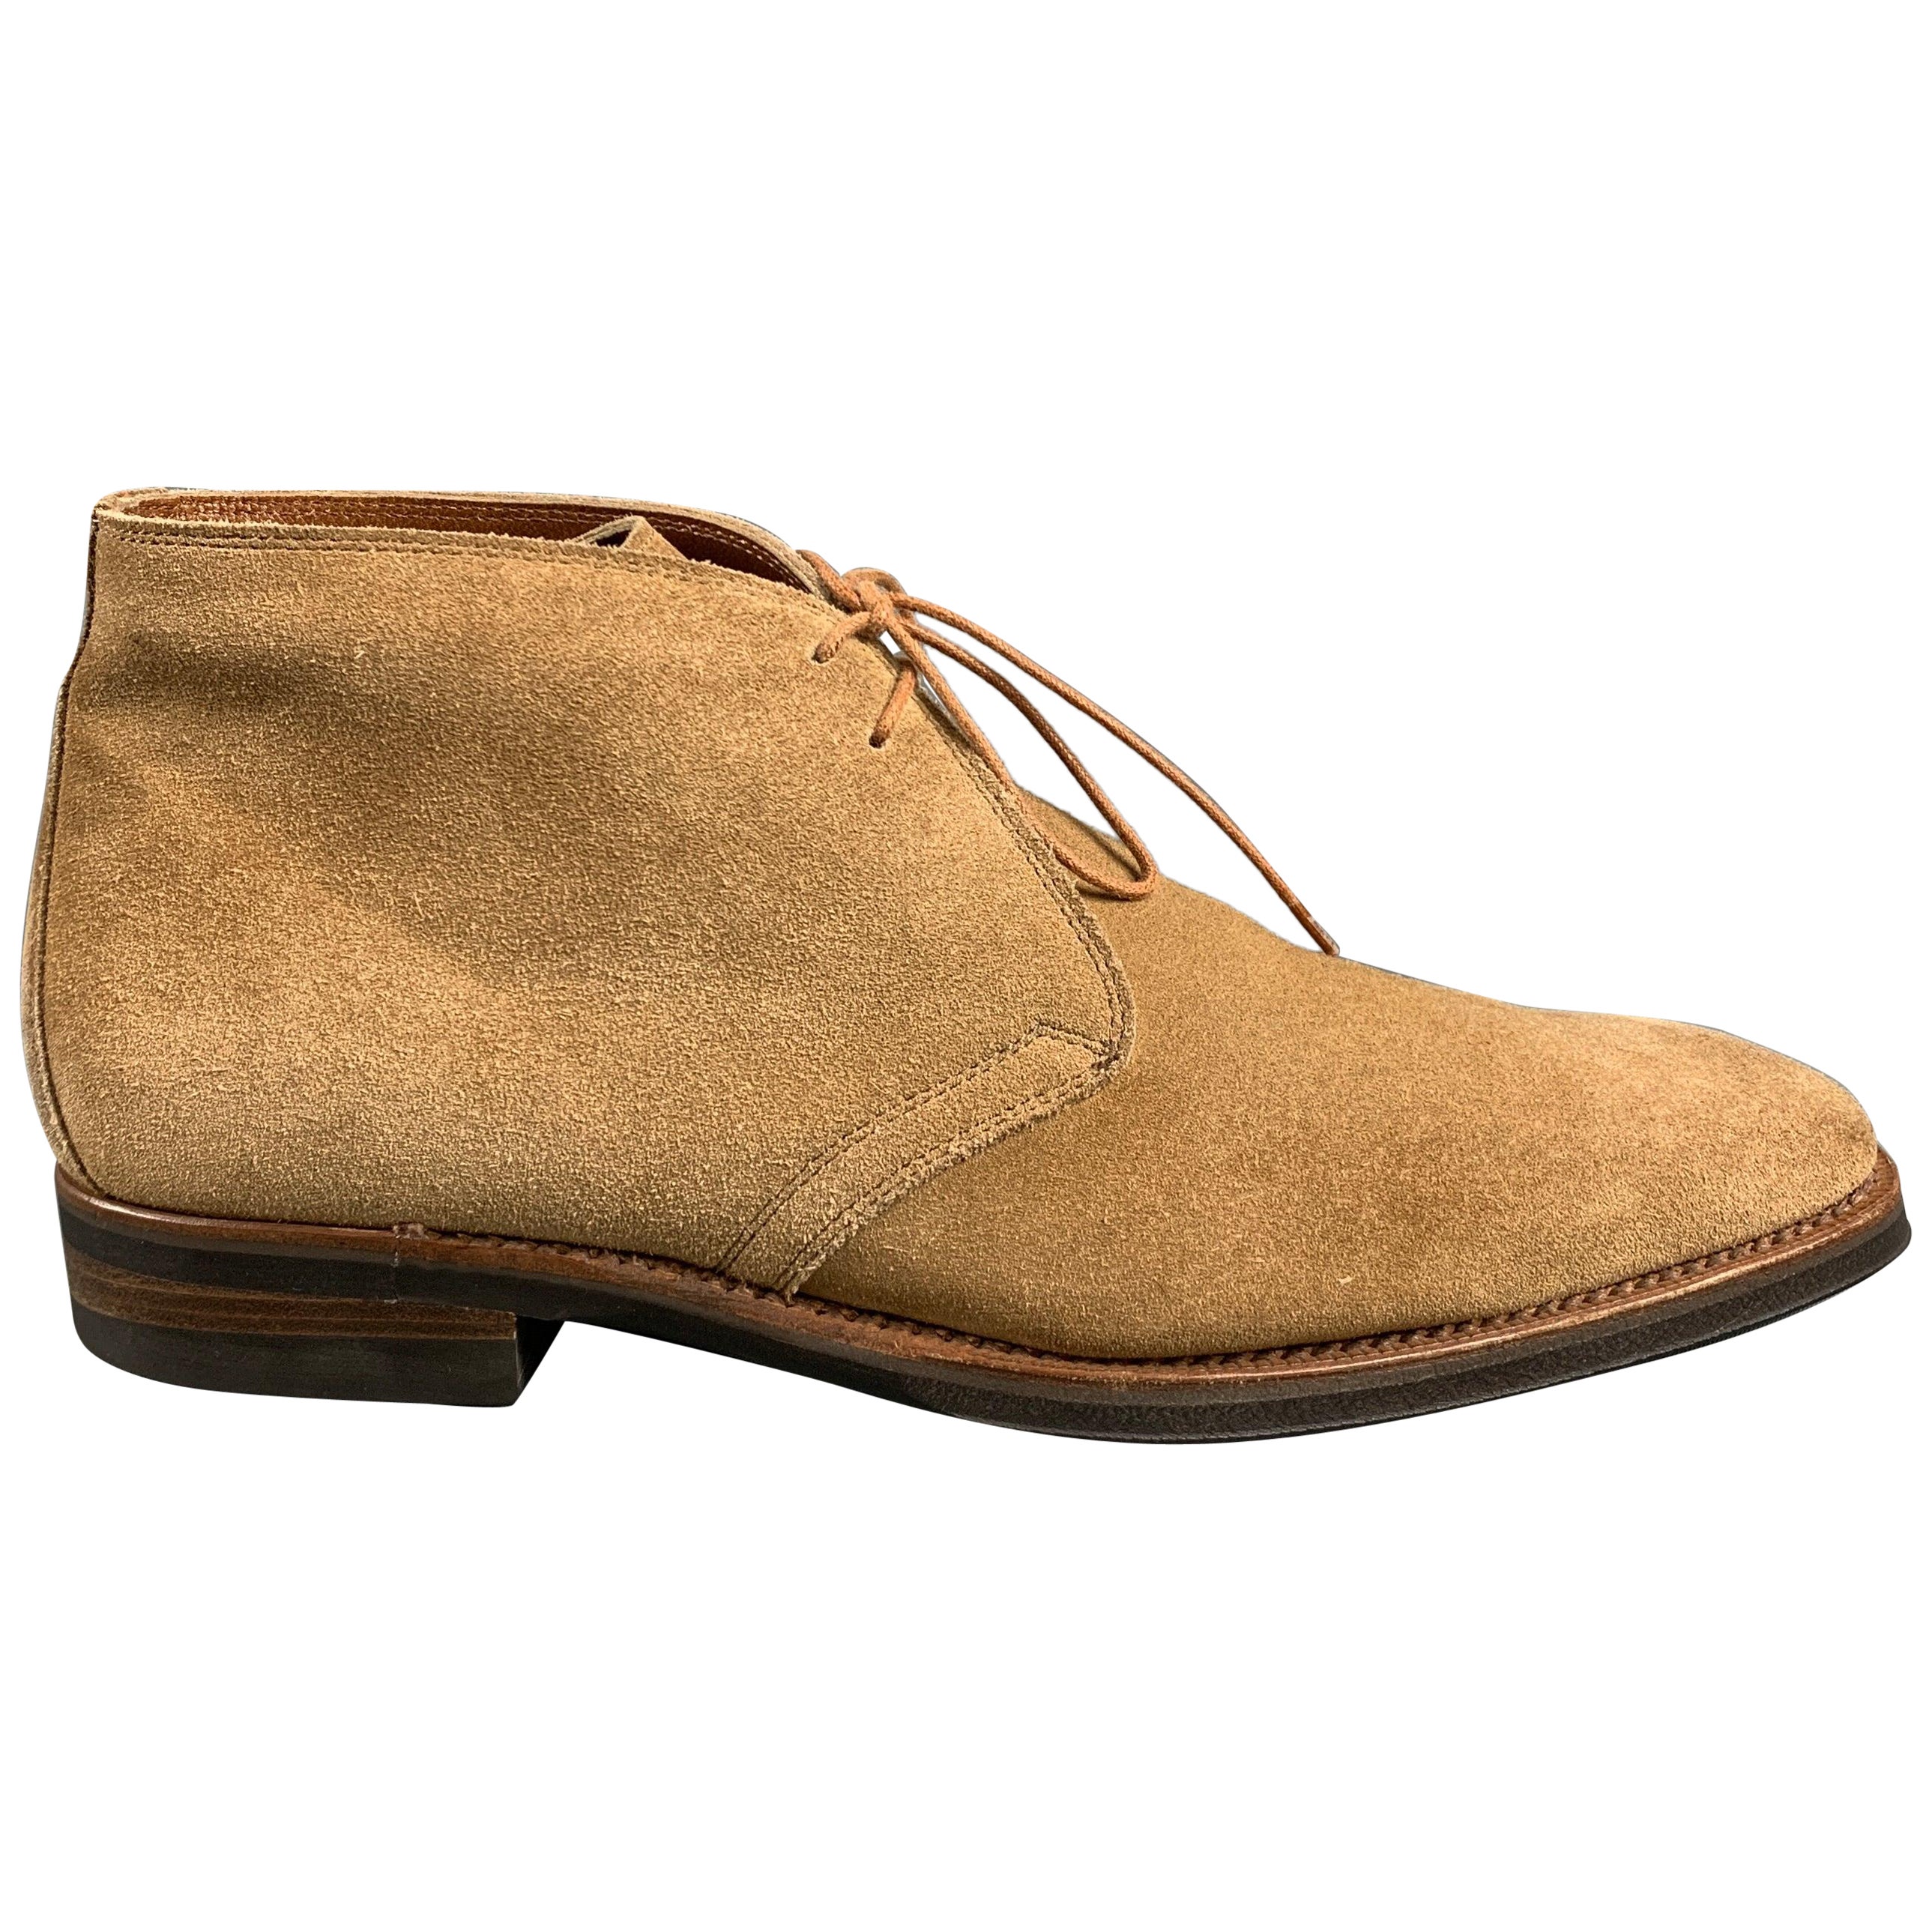 BATTISTONI Size 7 Camel Suede Lace Up Boots For Sale